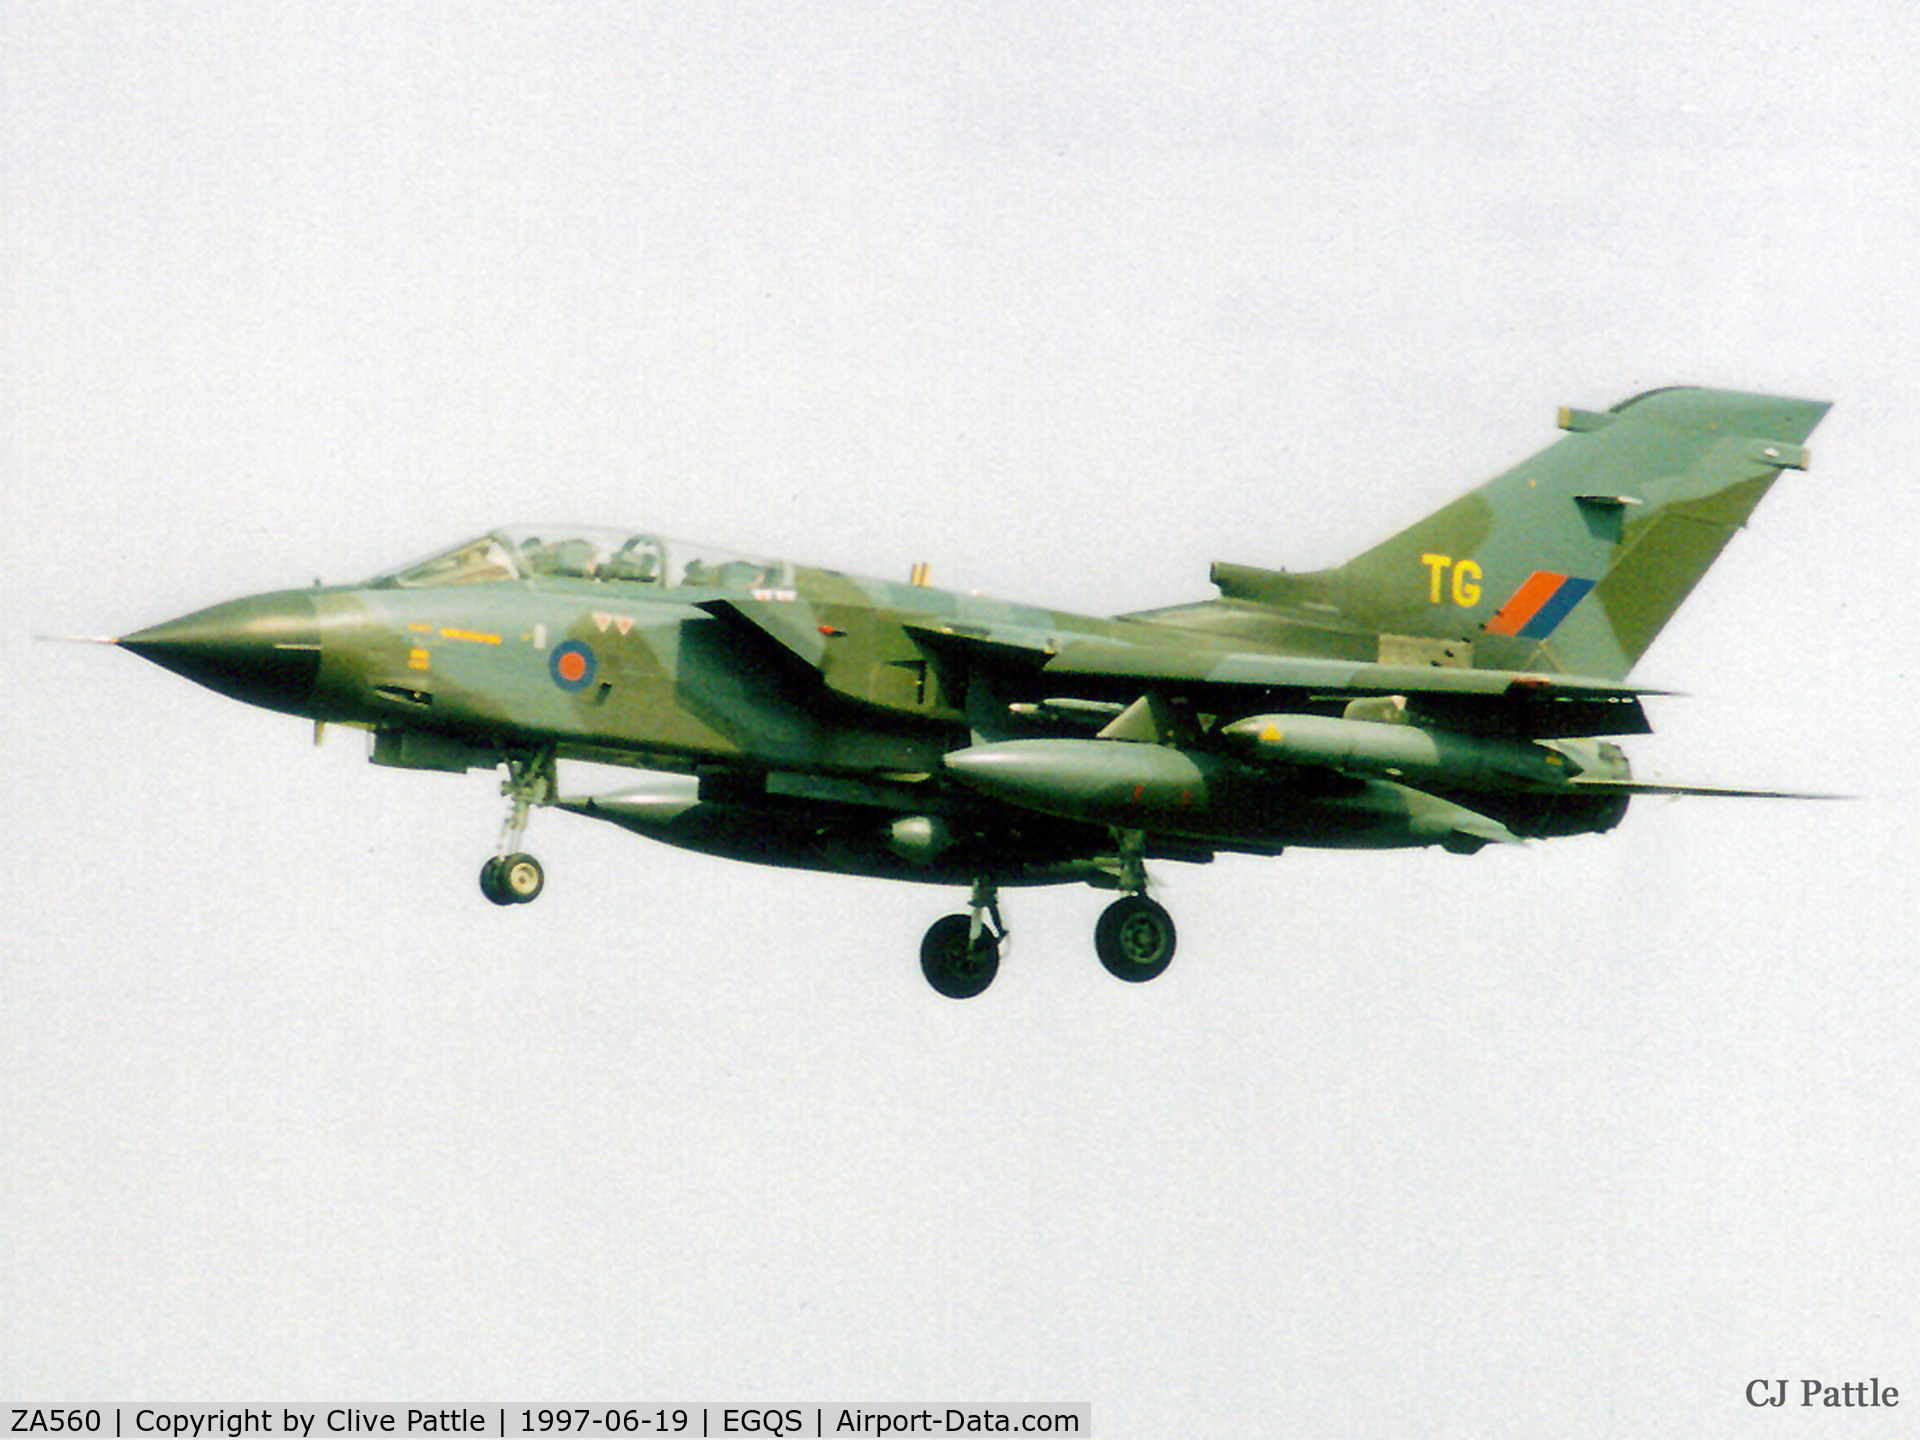 ZA560, 1981 Panavia Tornado GR.1 C/N 082/BS024/3044, Scanned from print, in its former GR.1 days, coded TG of 15 R Sqn RAF, ZA560 seen landing at RAF Lossiemouth in June 1997